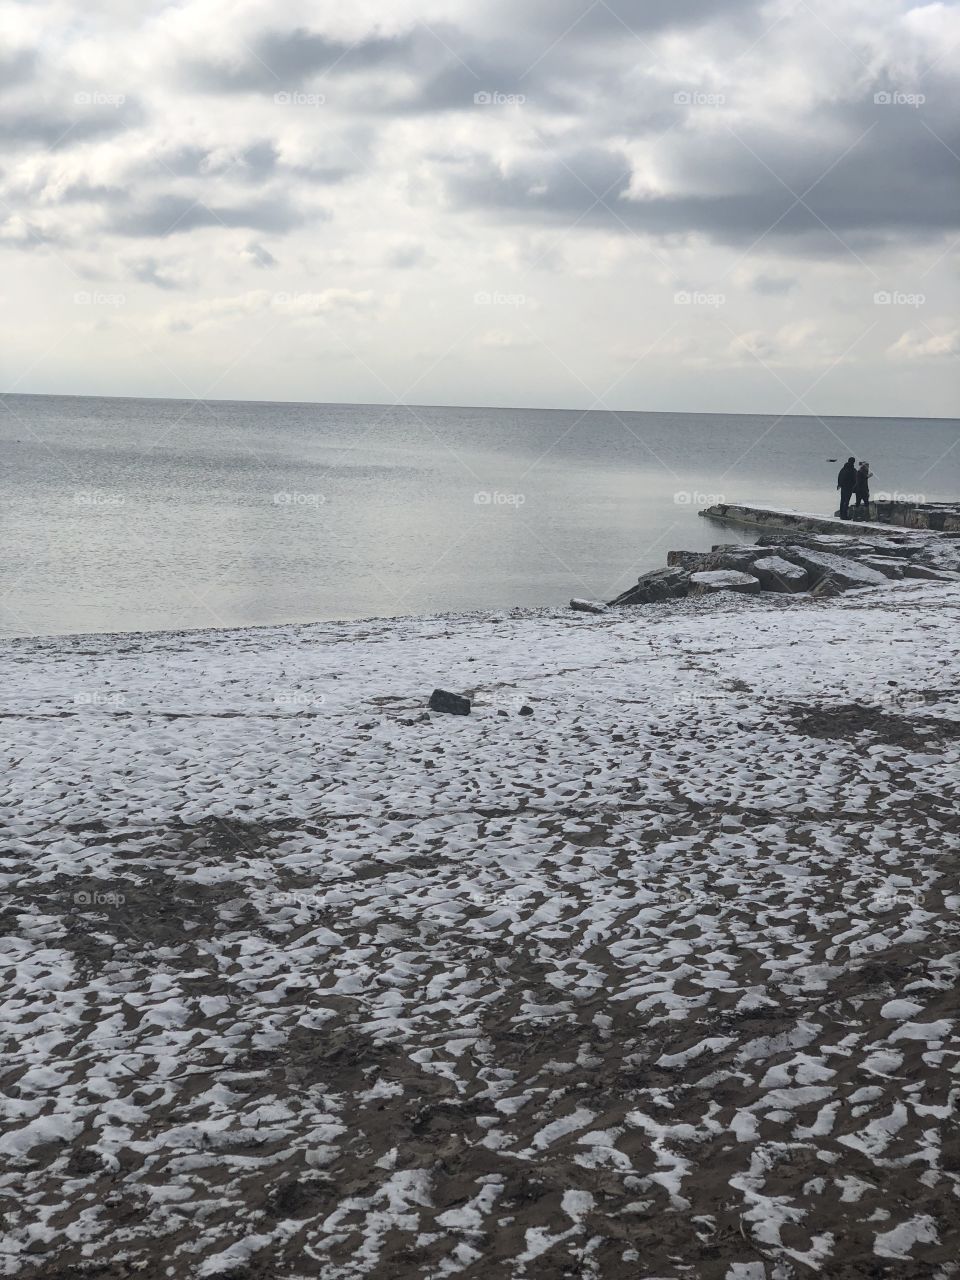 Light snow at woodbine beach Toronto. A prefect place for morning walk.